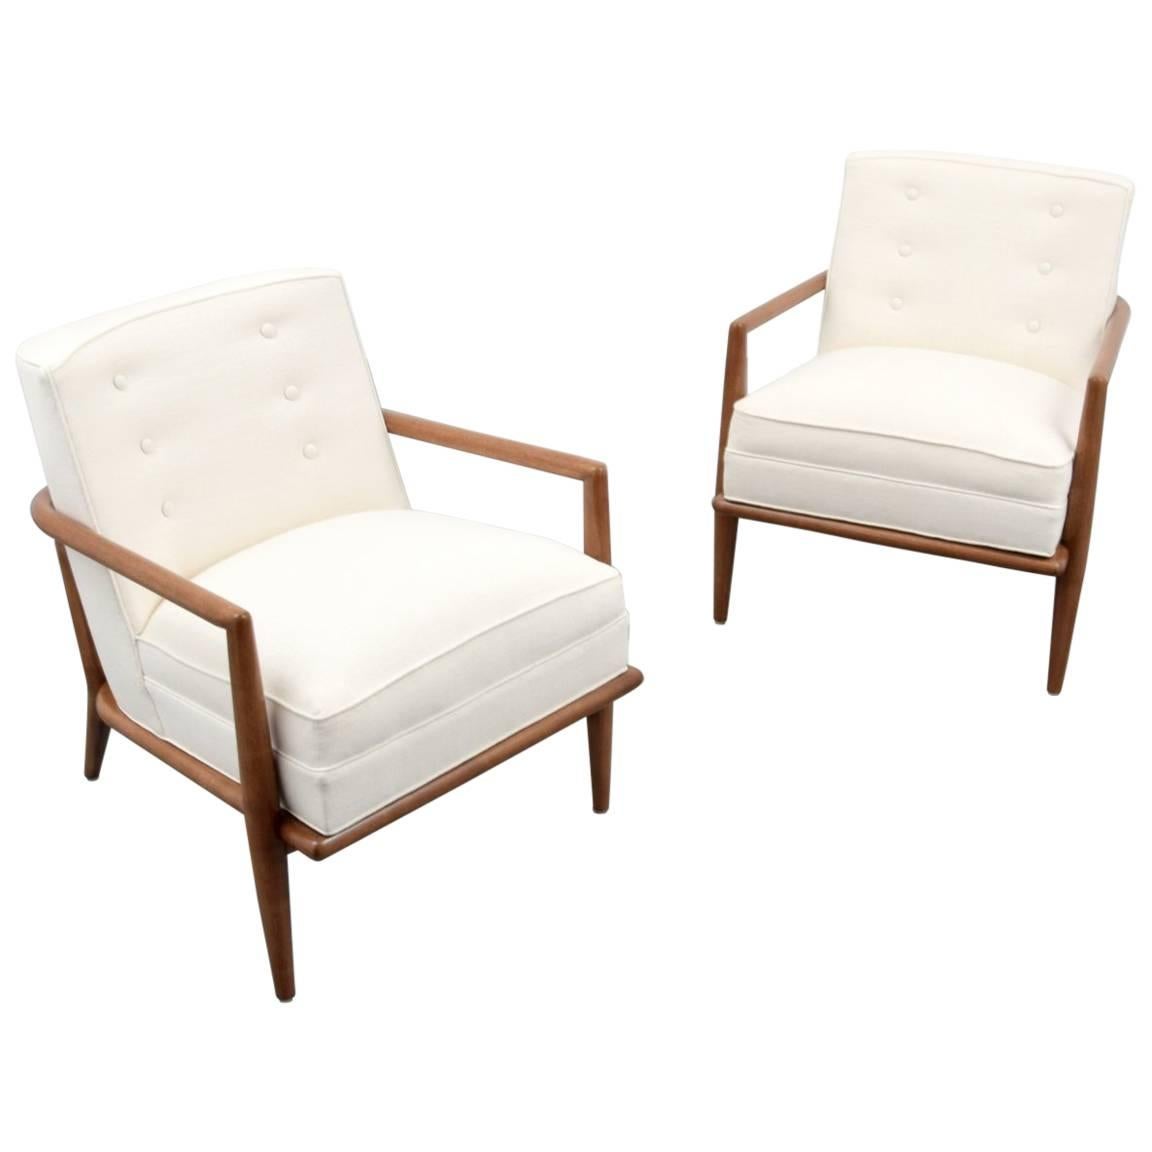 Pair of T.H. Robsjohn-Gibbings Lounge or Armchairs, Commissioned For Sale